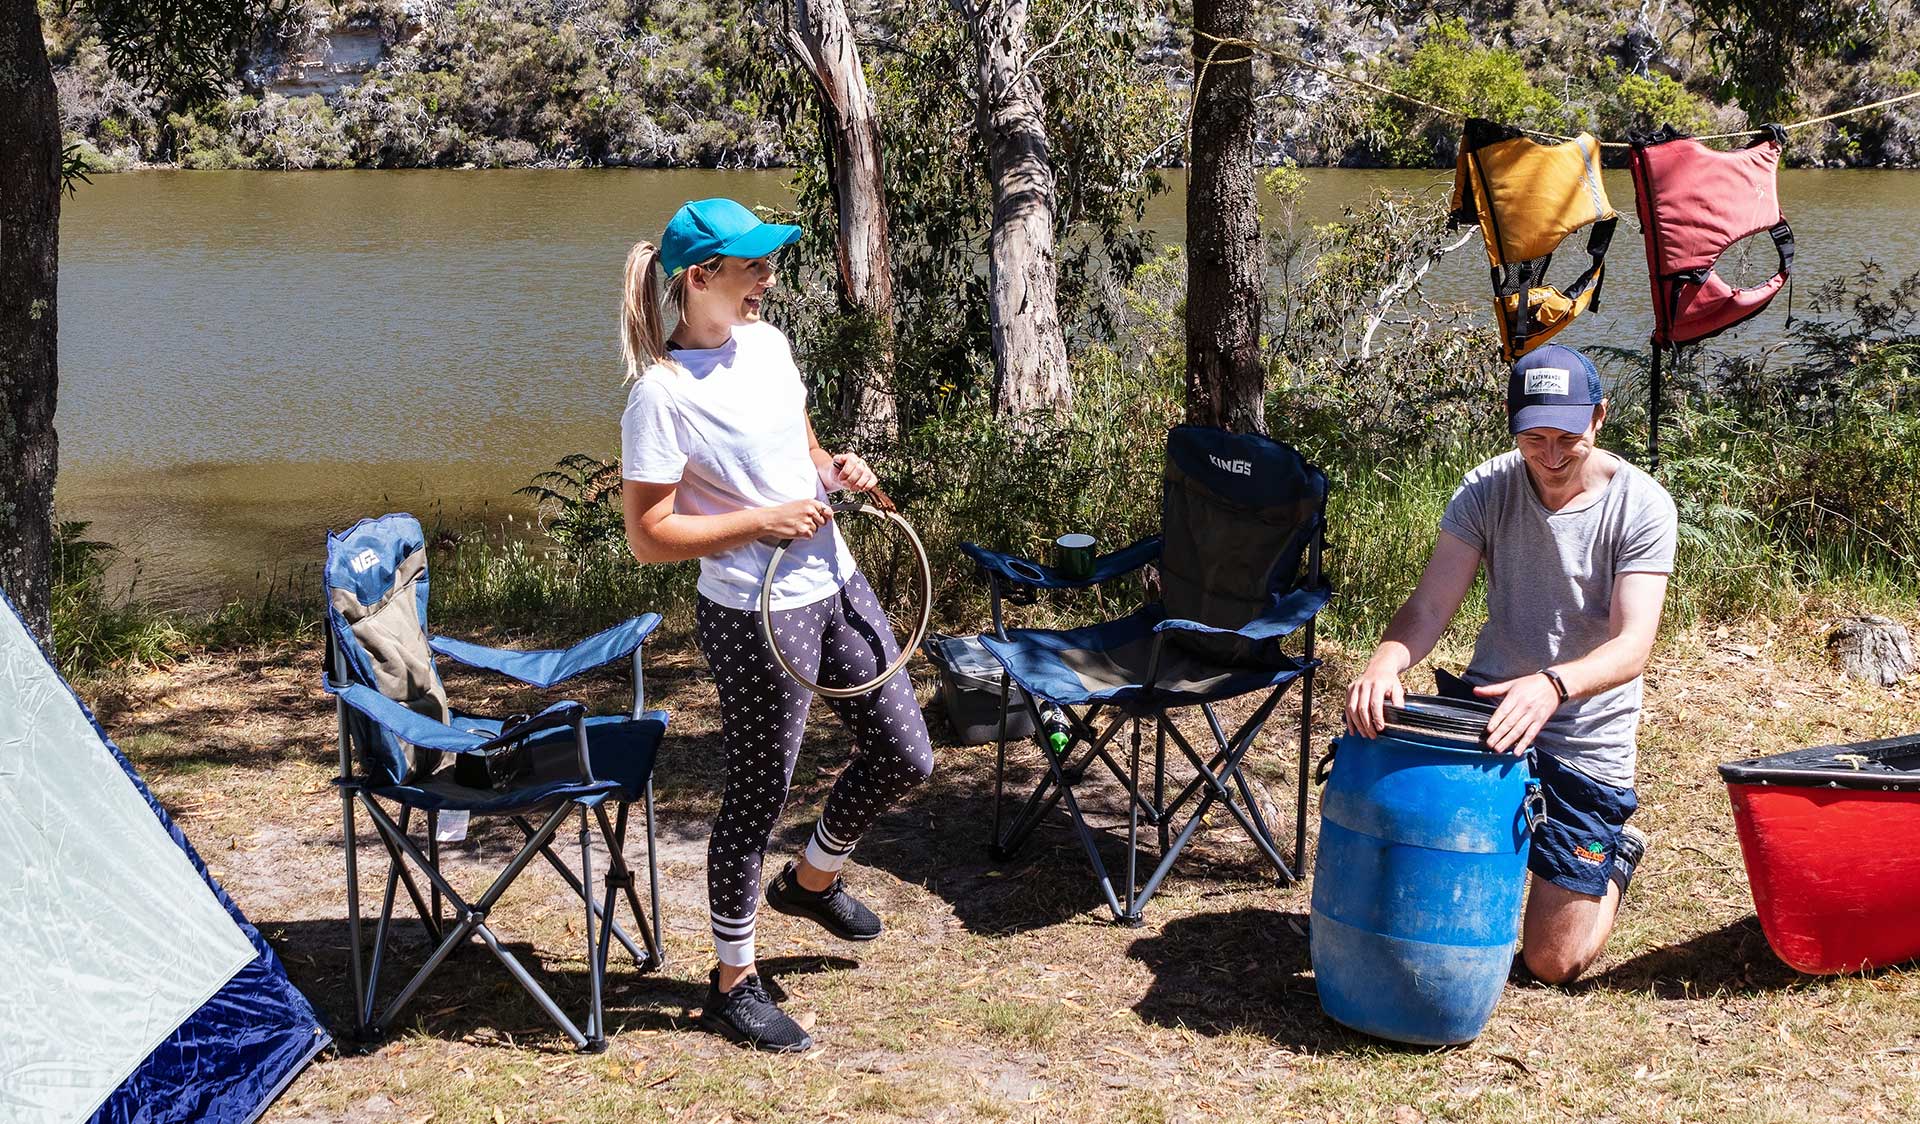 A couple unpack their waterproof barrel at a campsite in the Lower Glenelg National Park.